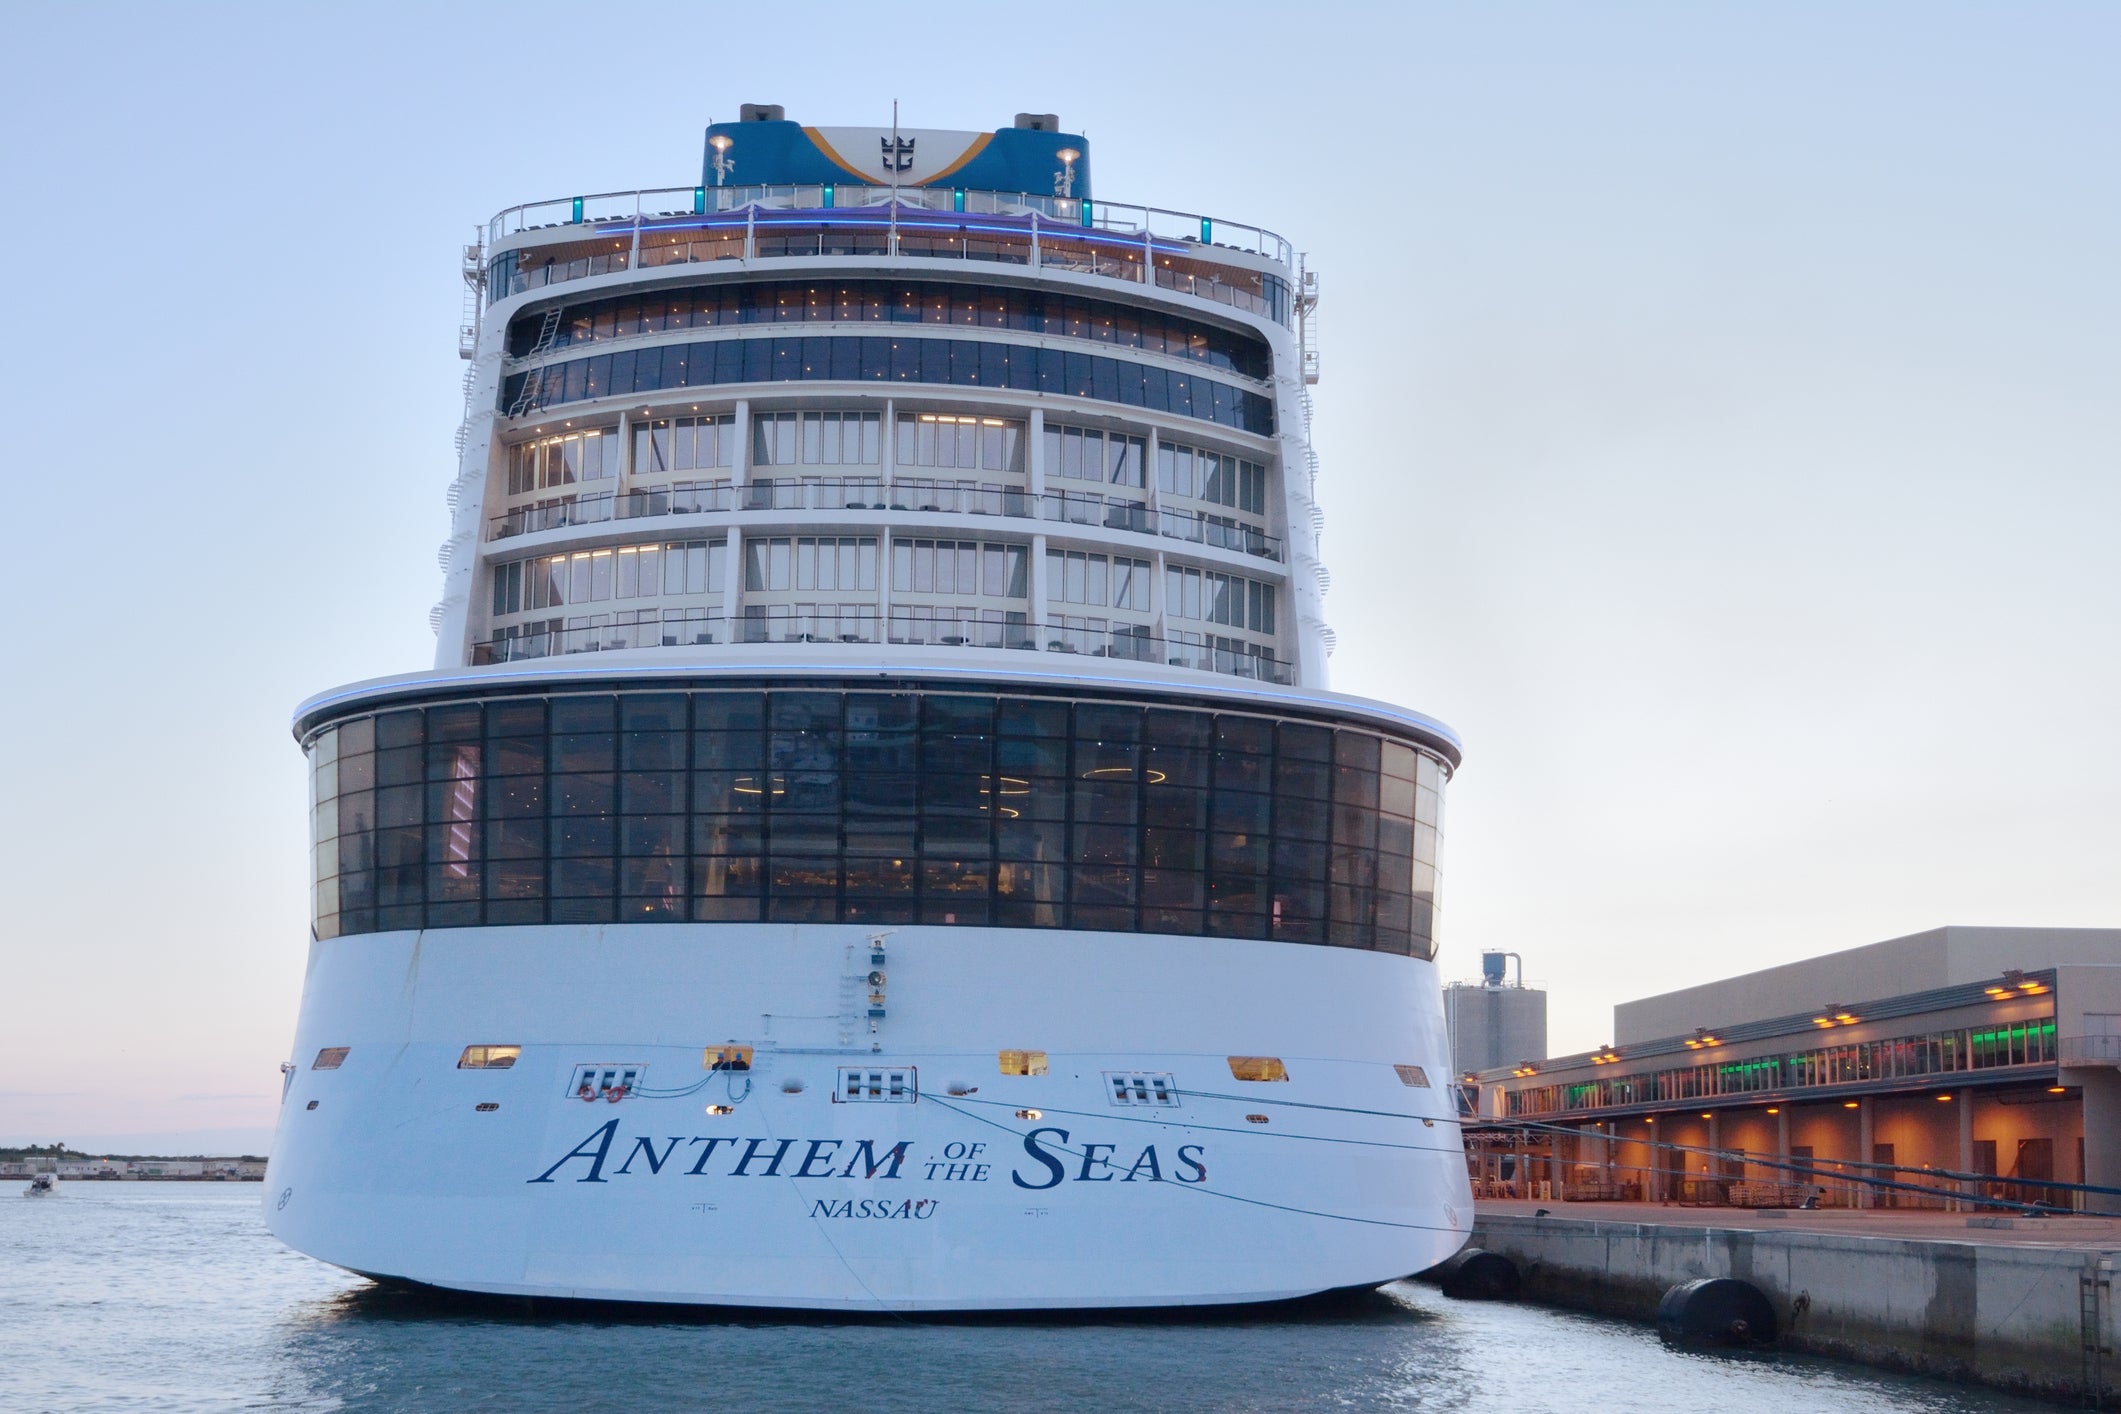 The Royal Caribbean cruise ship Anthem of the Sea tied to the dock at Terminal 10 in Port Canaveral, Florida